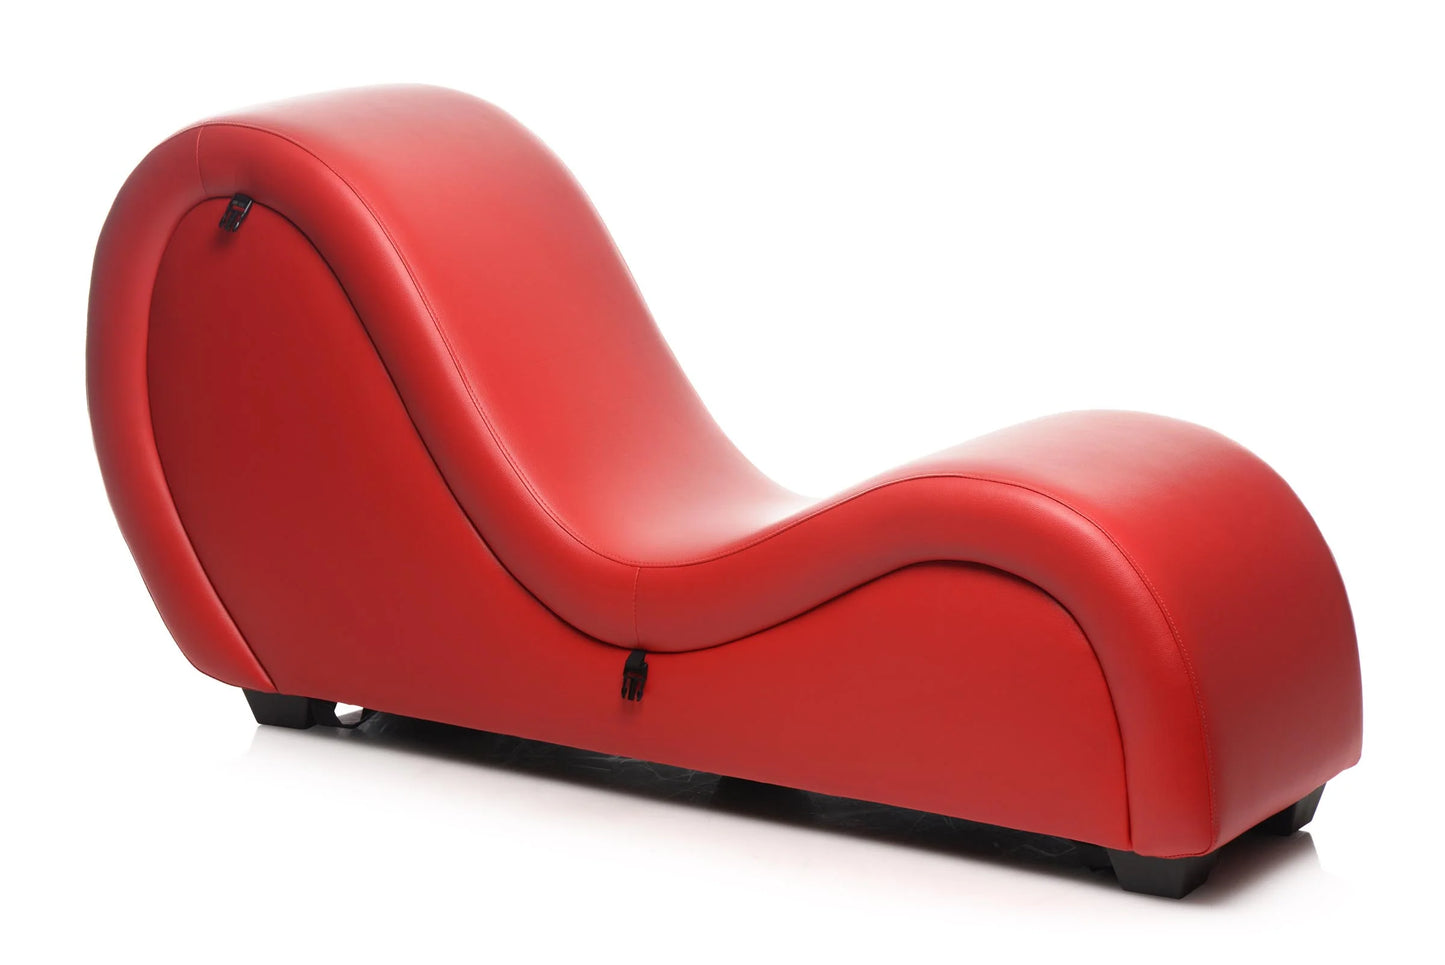 MASTER SERIES KINKY COUCH SEX CHAISE LOUNGE WITH LOVE PILLOWS